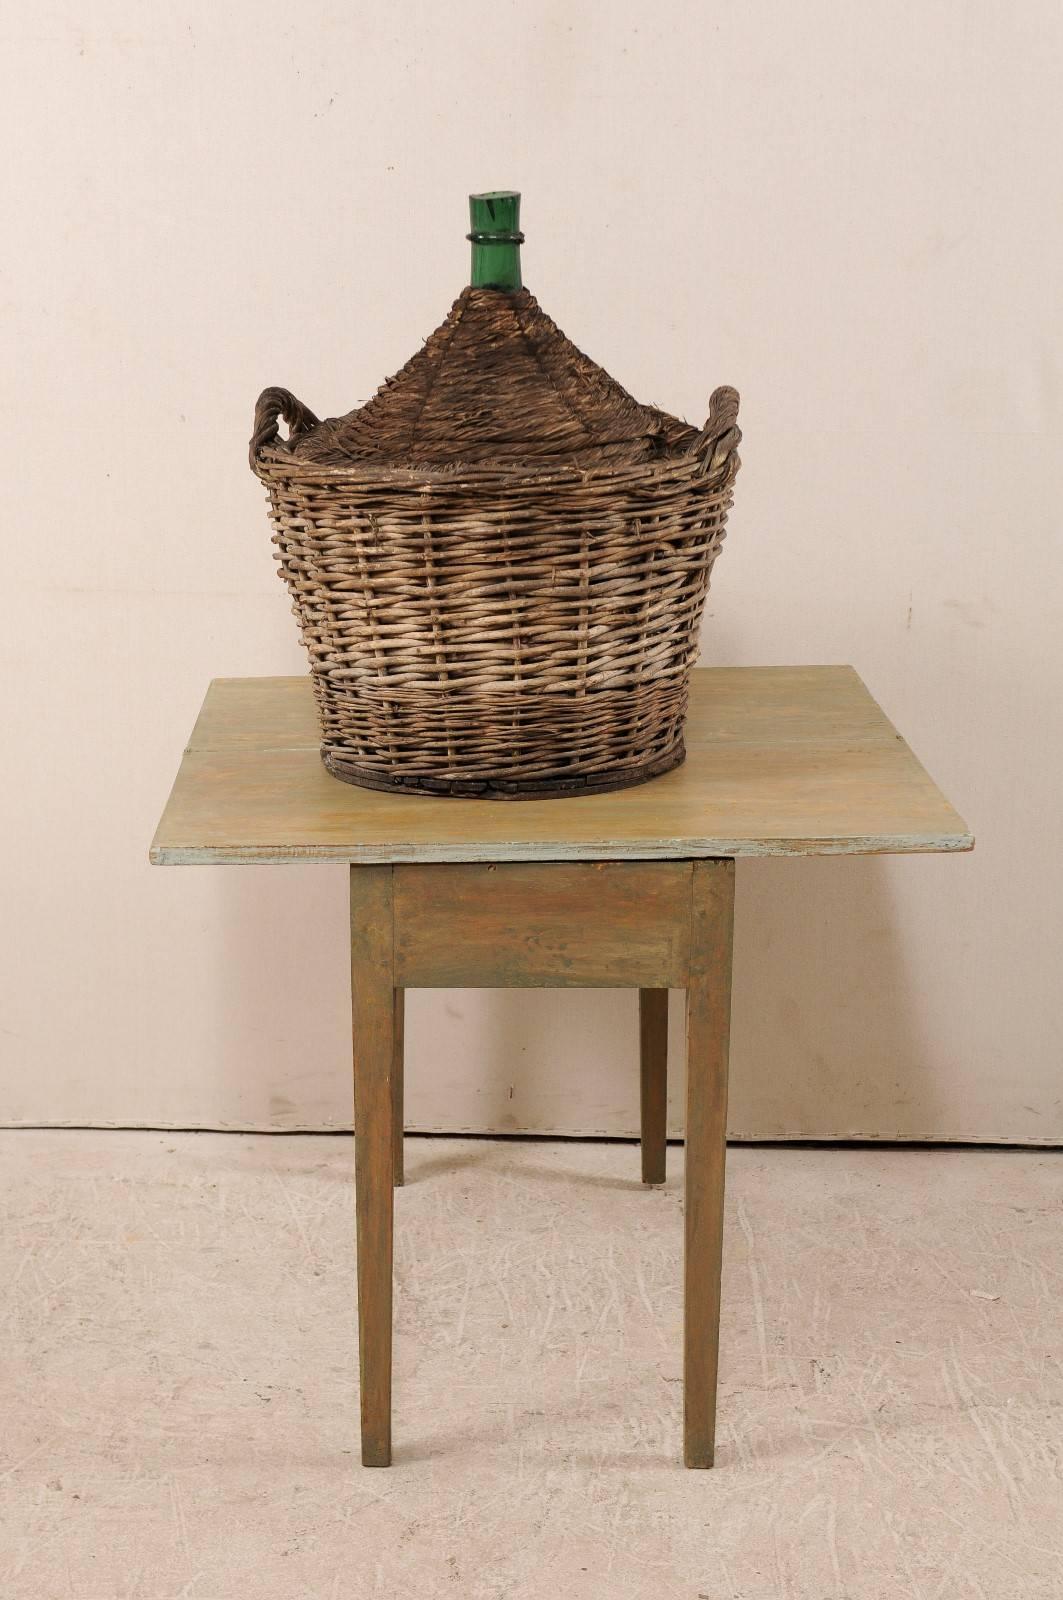 French Mid-Century Handwoven Basket with a Large Demijohn Glass Wine Bottle 1